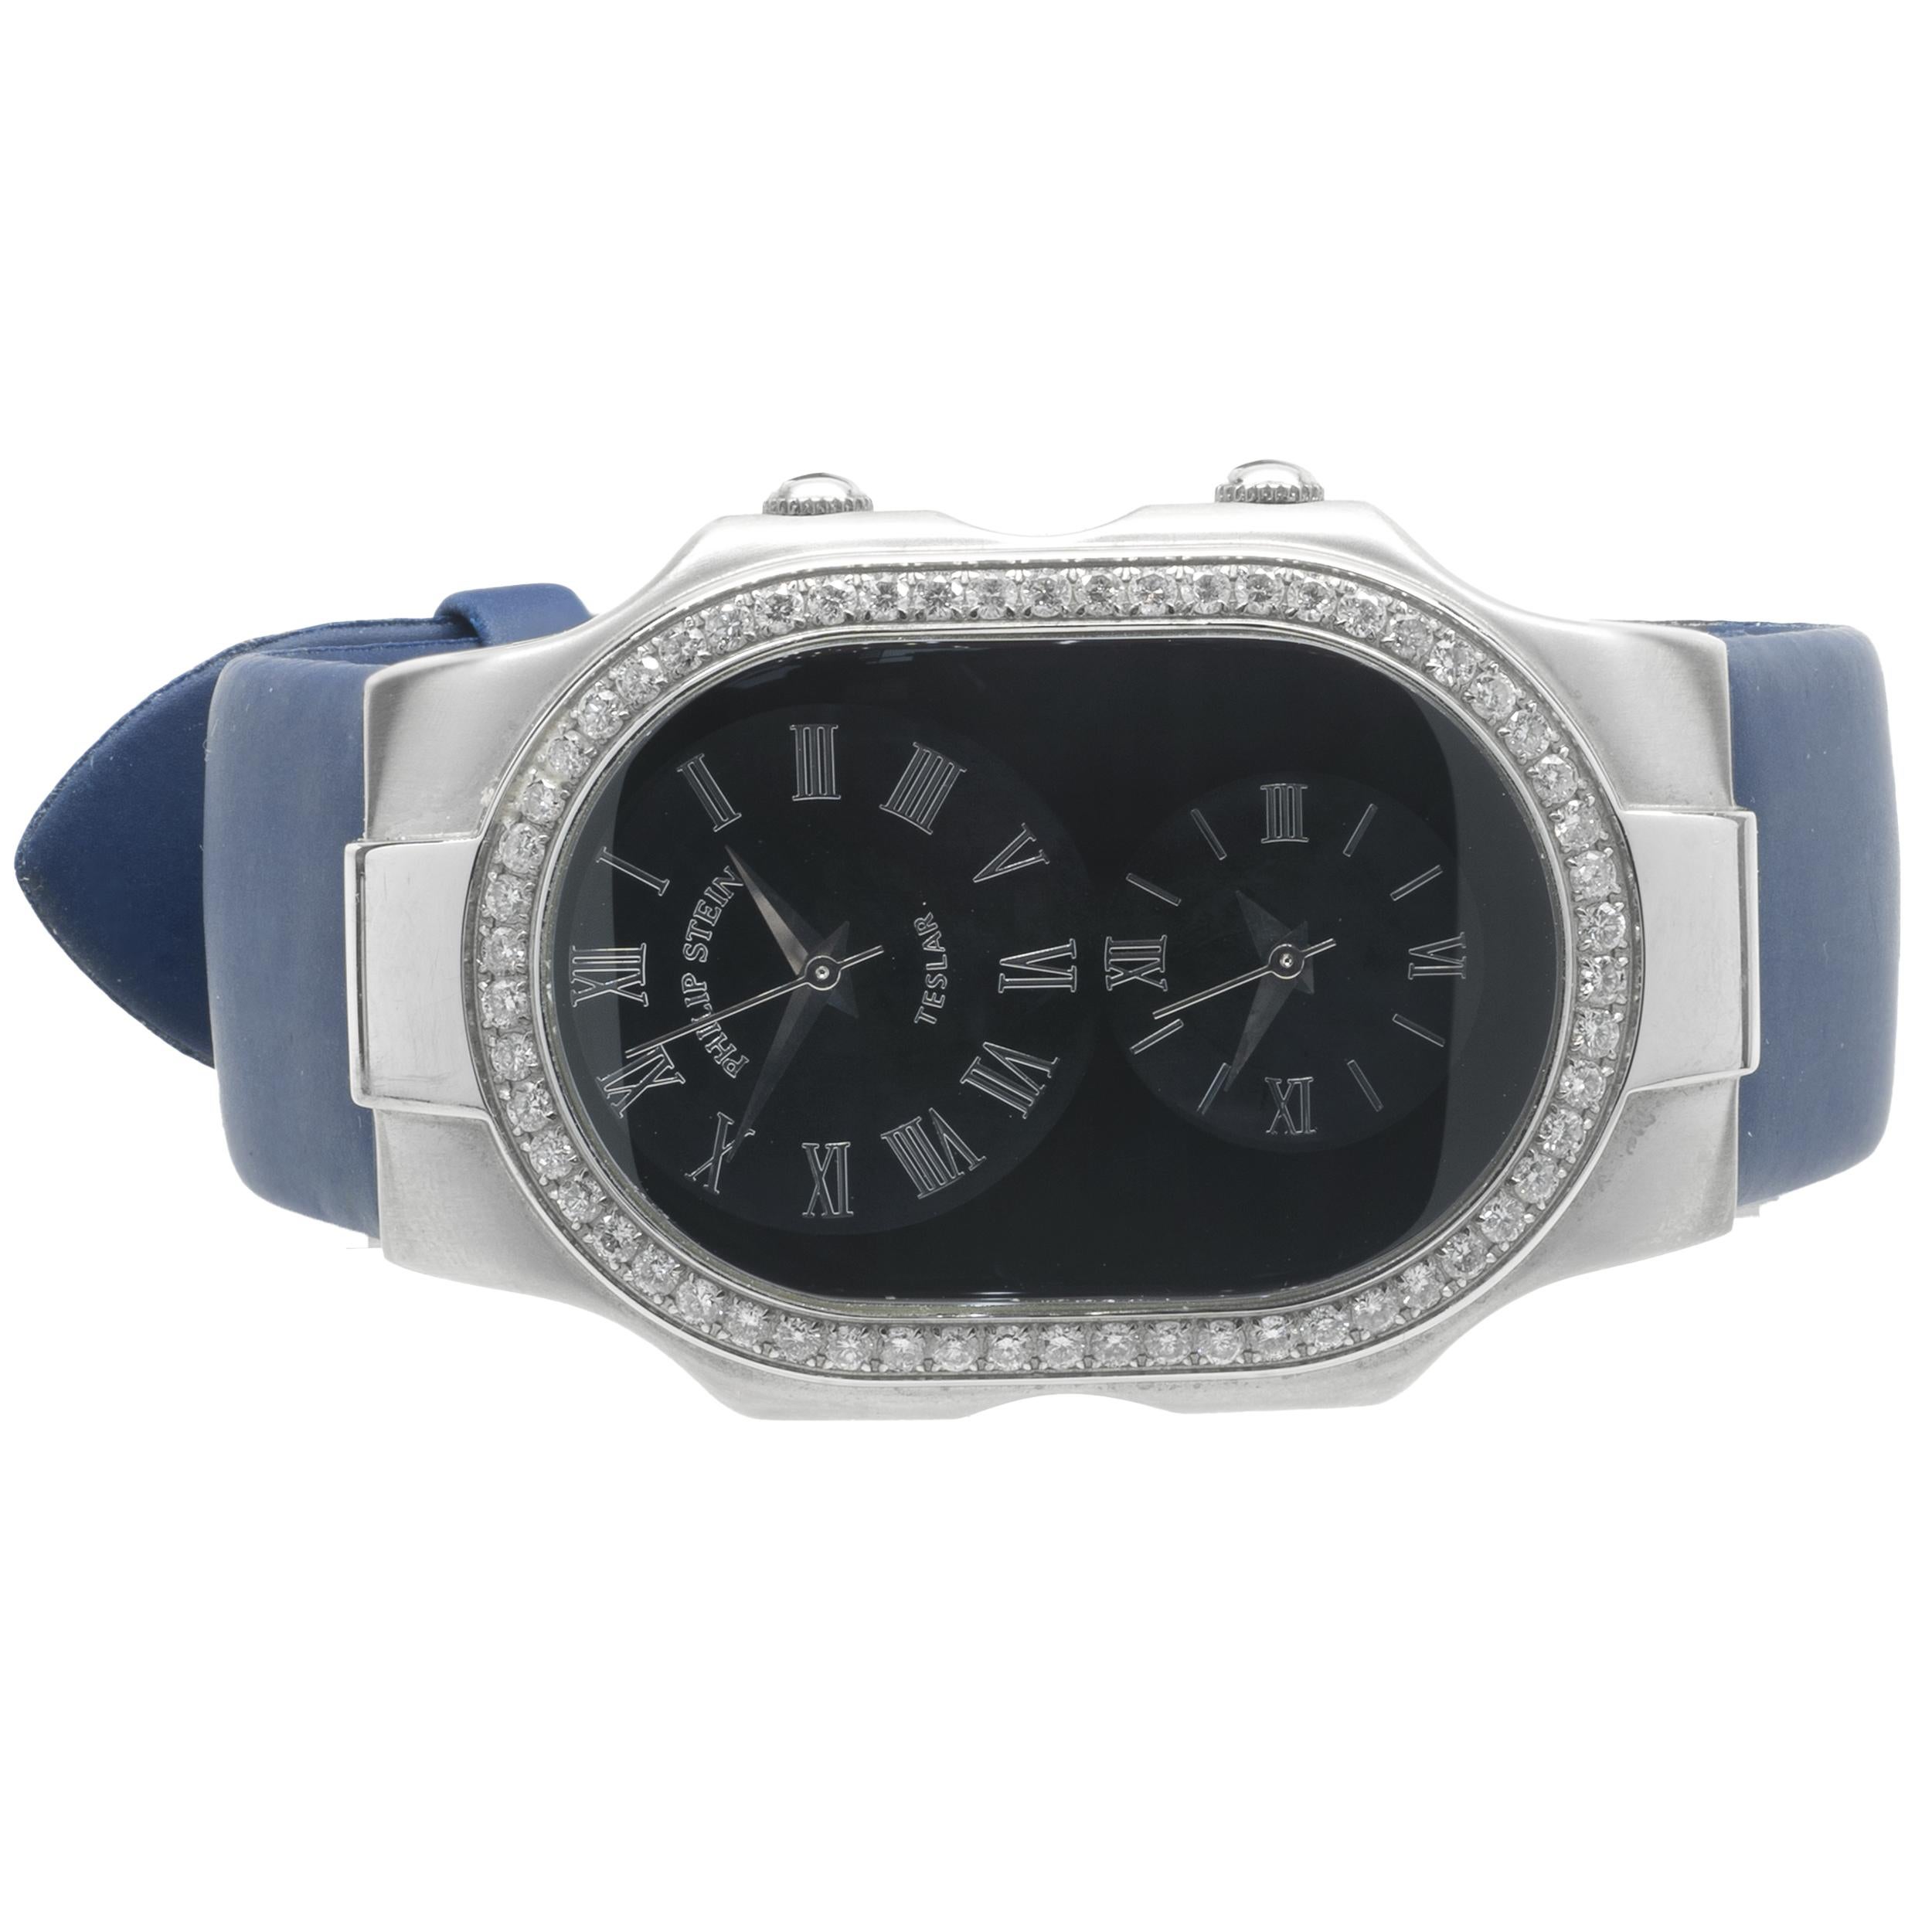 Movement: quartz
Function: hours, minutes, seconds, two-time zone
Case: 50mm x 34mm stainless steel case with sapphire crystal, stainless steel fixed bezel, stainless steel winding crowns, water resistant to 30 meters
Band: navy blue rubber strap